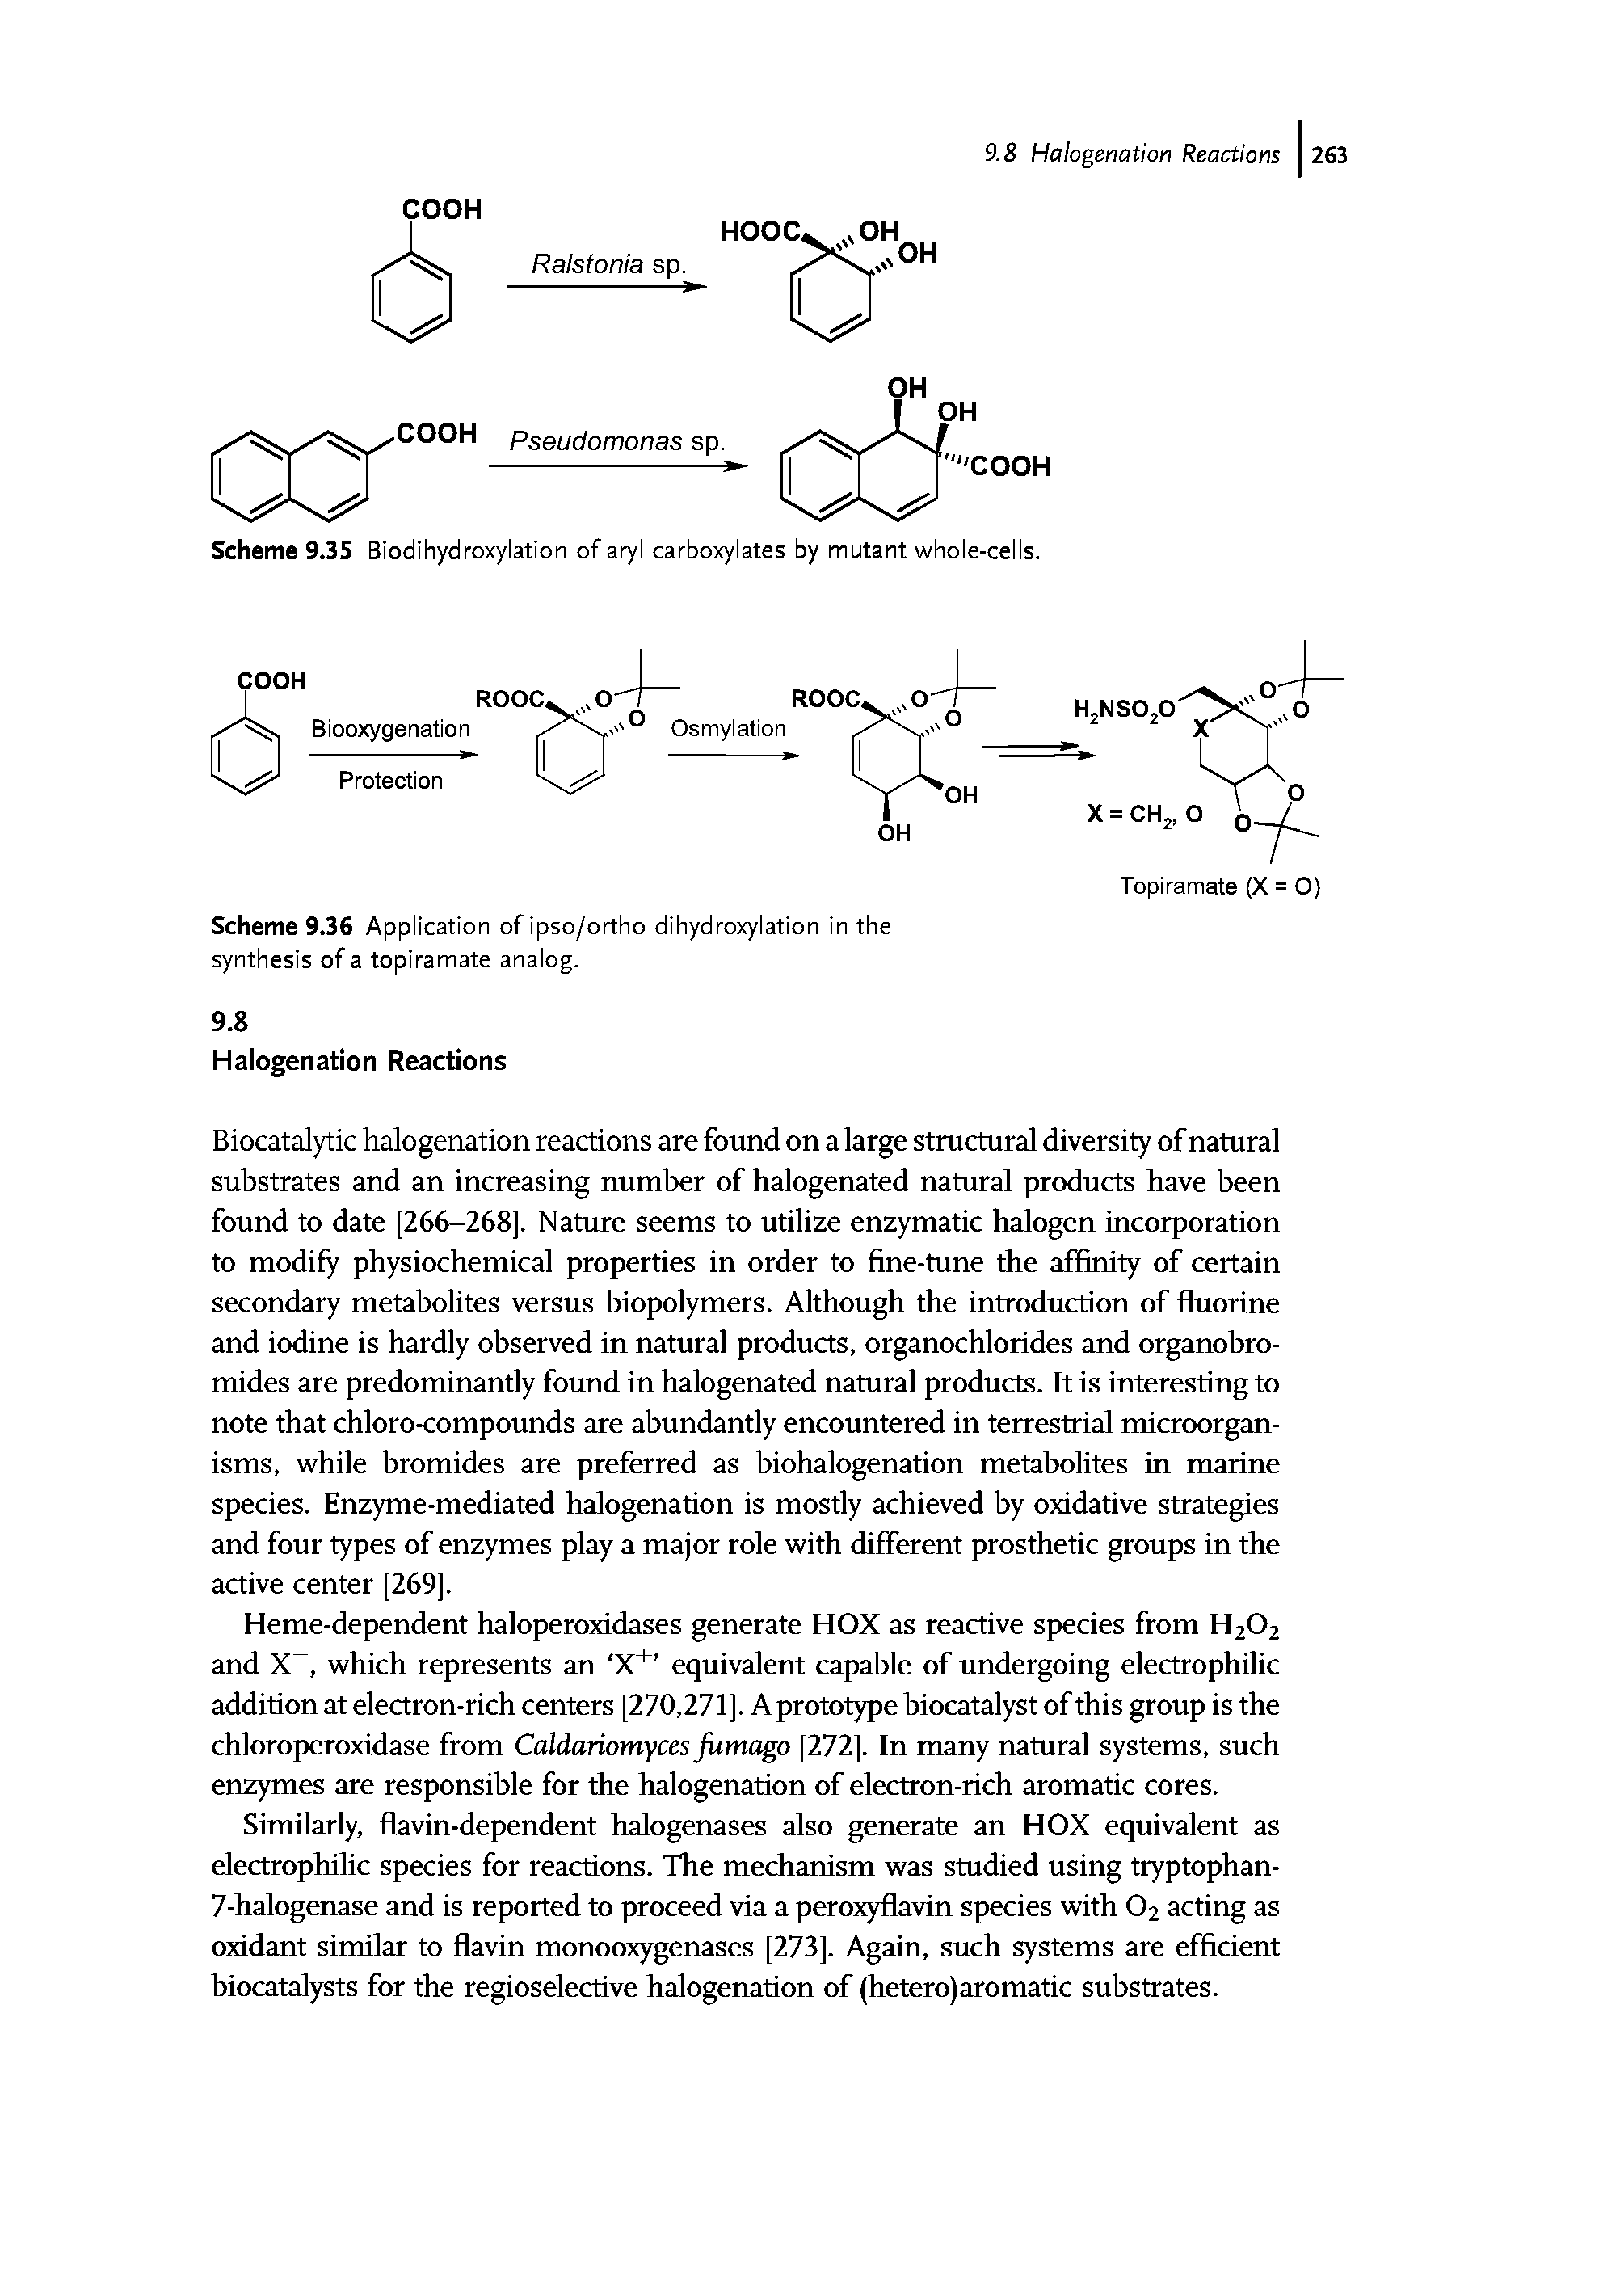 Scheme 9.35 Biodihydroxylation of aryl carboxylates by mutant whole-cells.